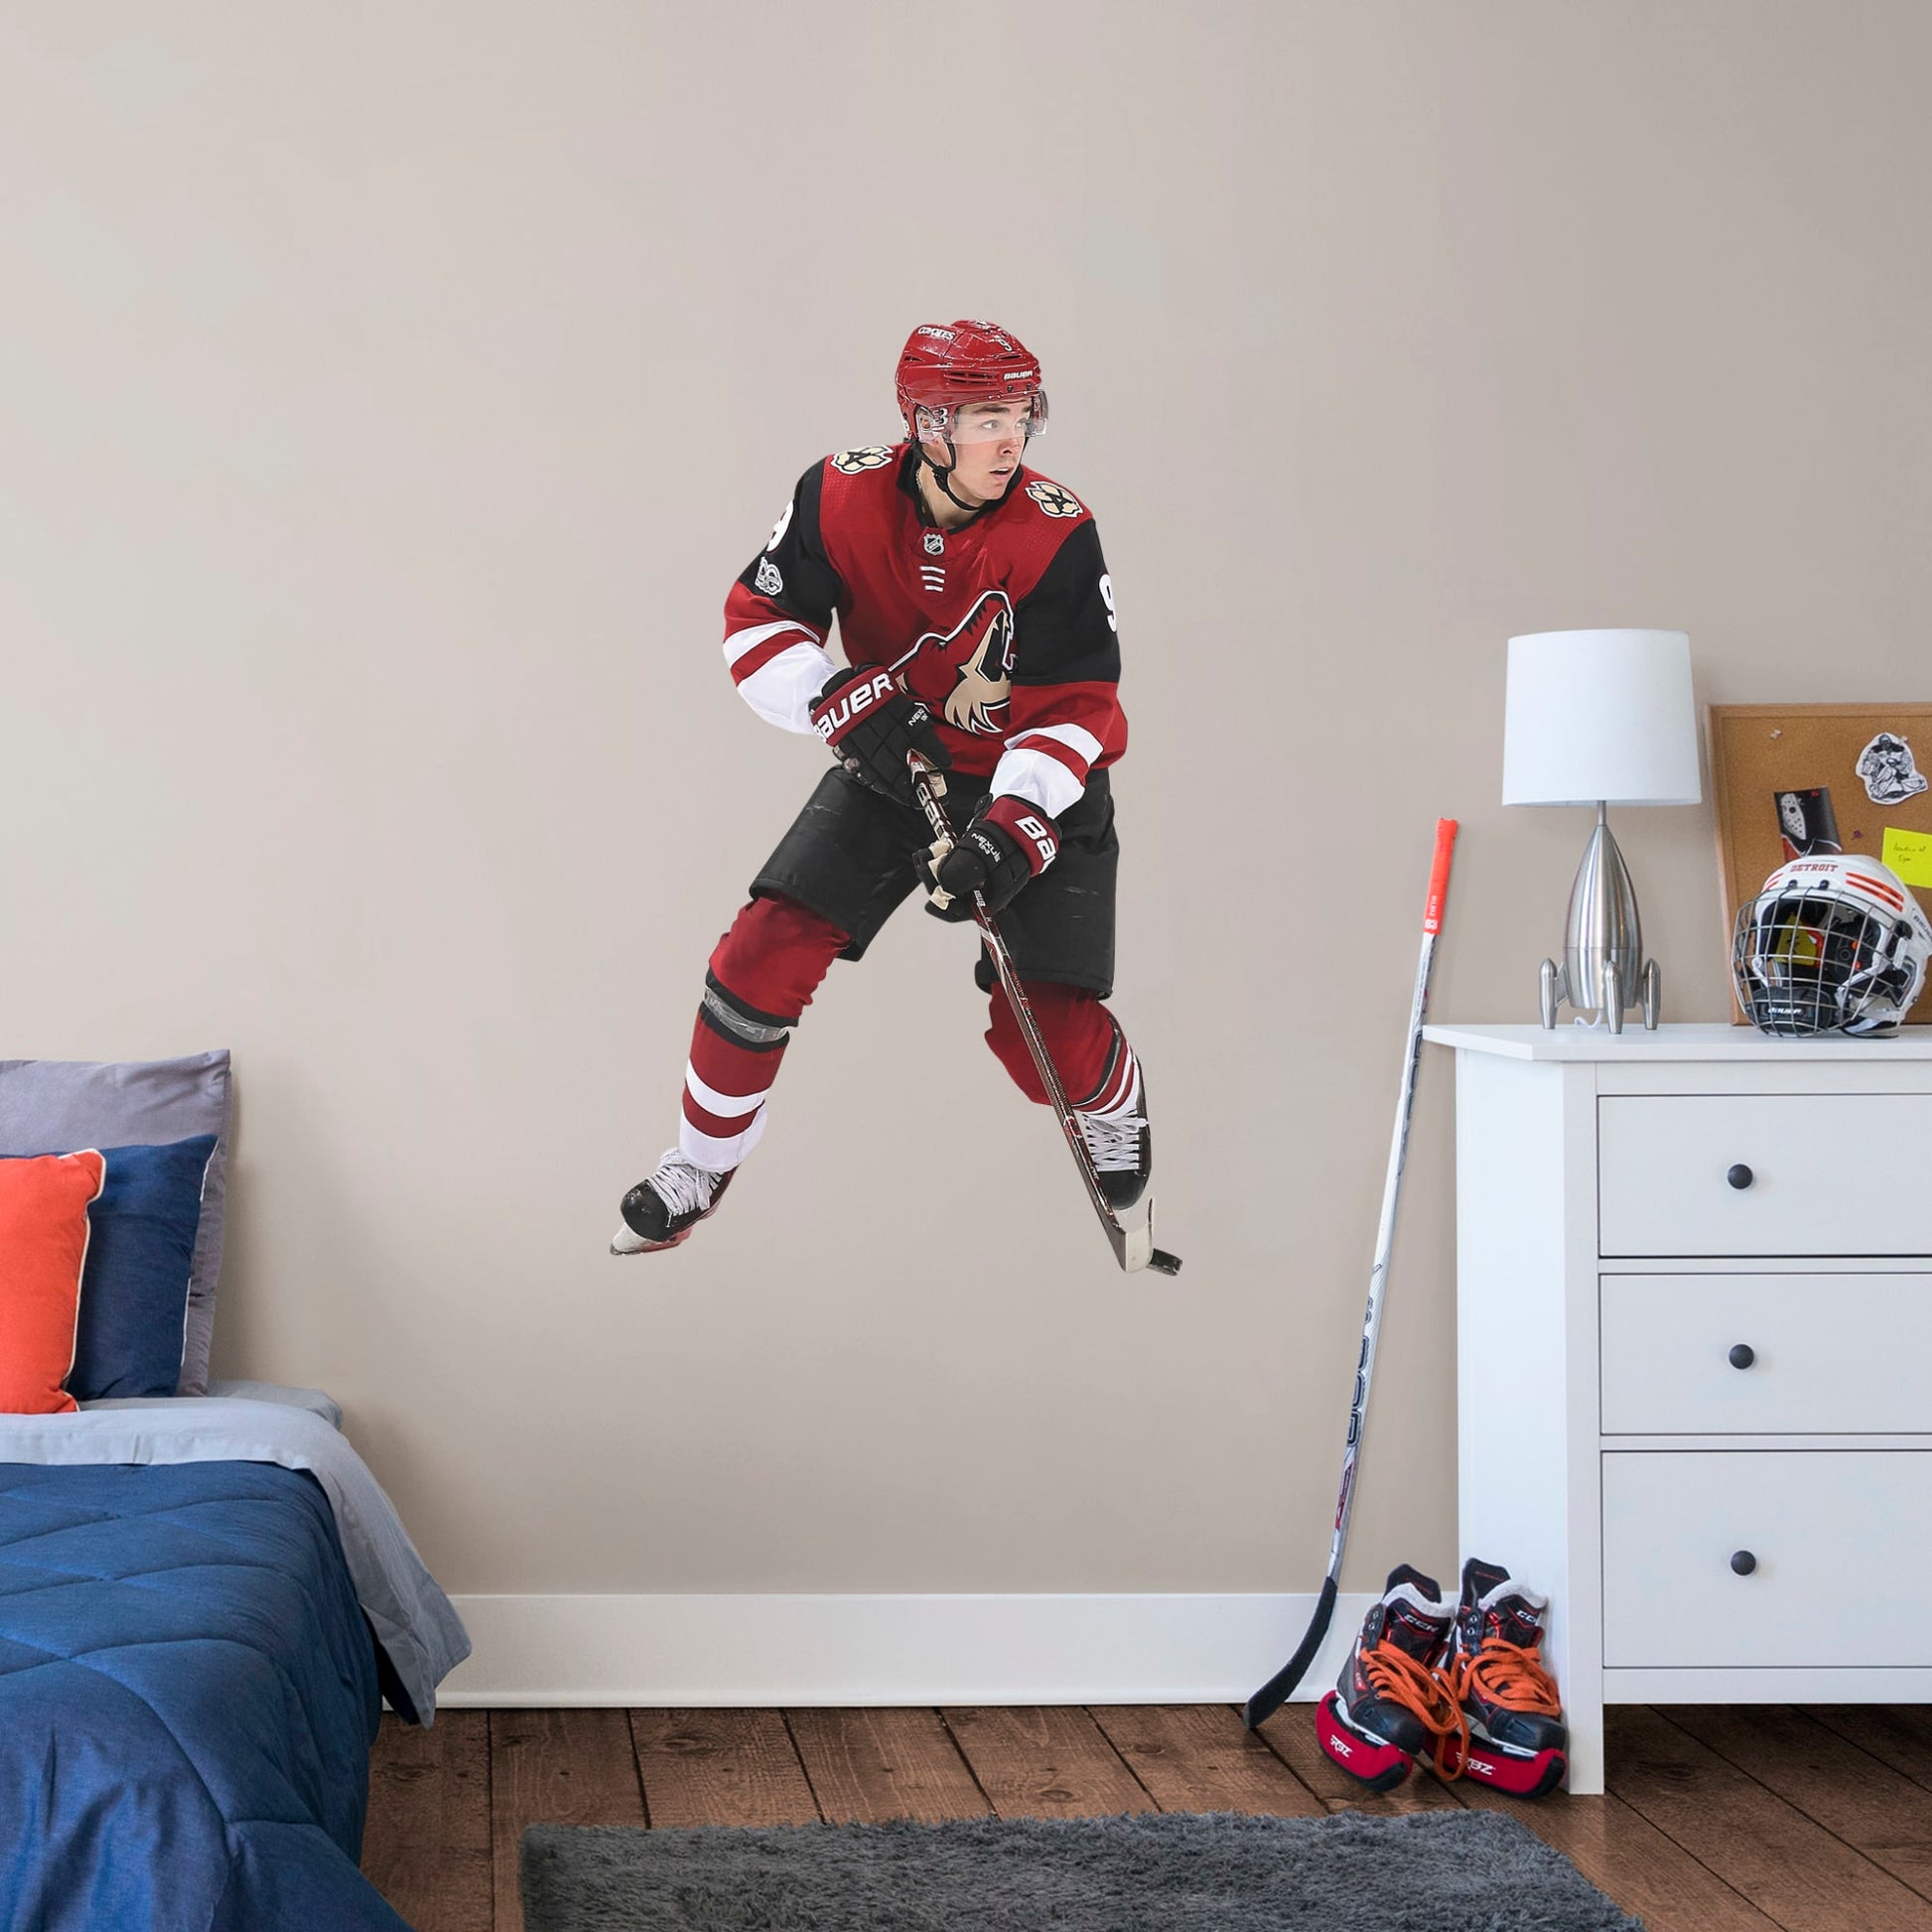 Giant Athlete + 1 Decal (31"W x 51"H) Drafted seventh overall in the 2016, left wing player Clayton Keller is melting ice at Gila River Arena in Glendale. Cheer on Kellsy as he leads the Coyotes on to another championship with this distinctive colorful officially licensed NHL wall decal. Make a slap shot on a wall in your home, office, or coyote fan-den with this giftable reusable NHL decal. Perfect gift idea for a fan!